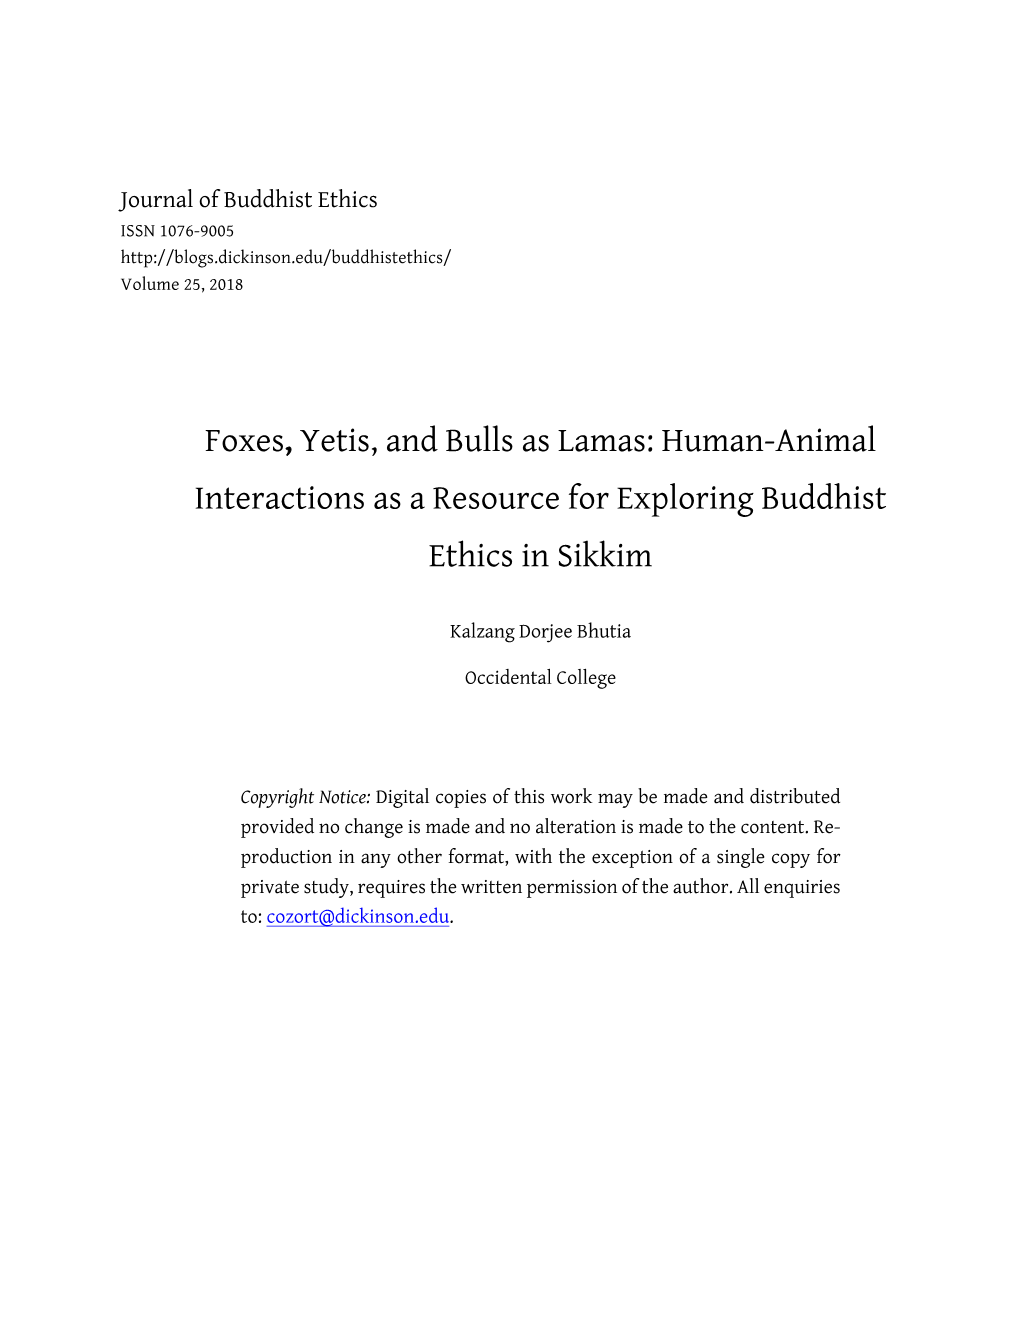 Foxes, Yetis, and Bulls As Lamas: Human-Animal Interactions As a Resource for Exploring Buddhist Ethics in Sikkim